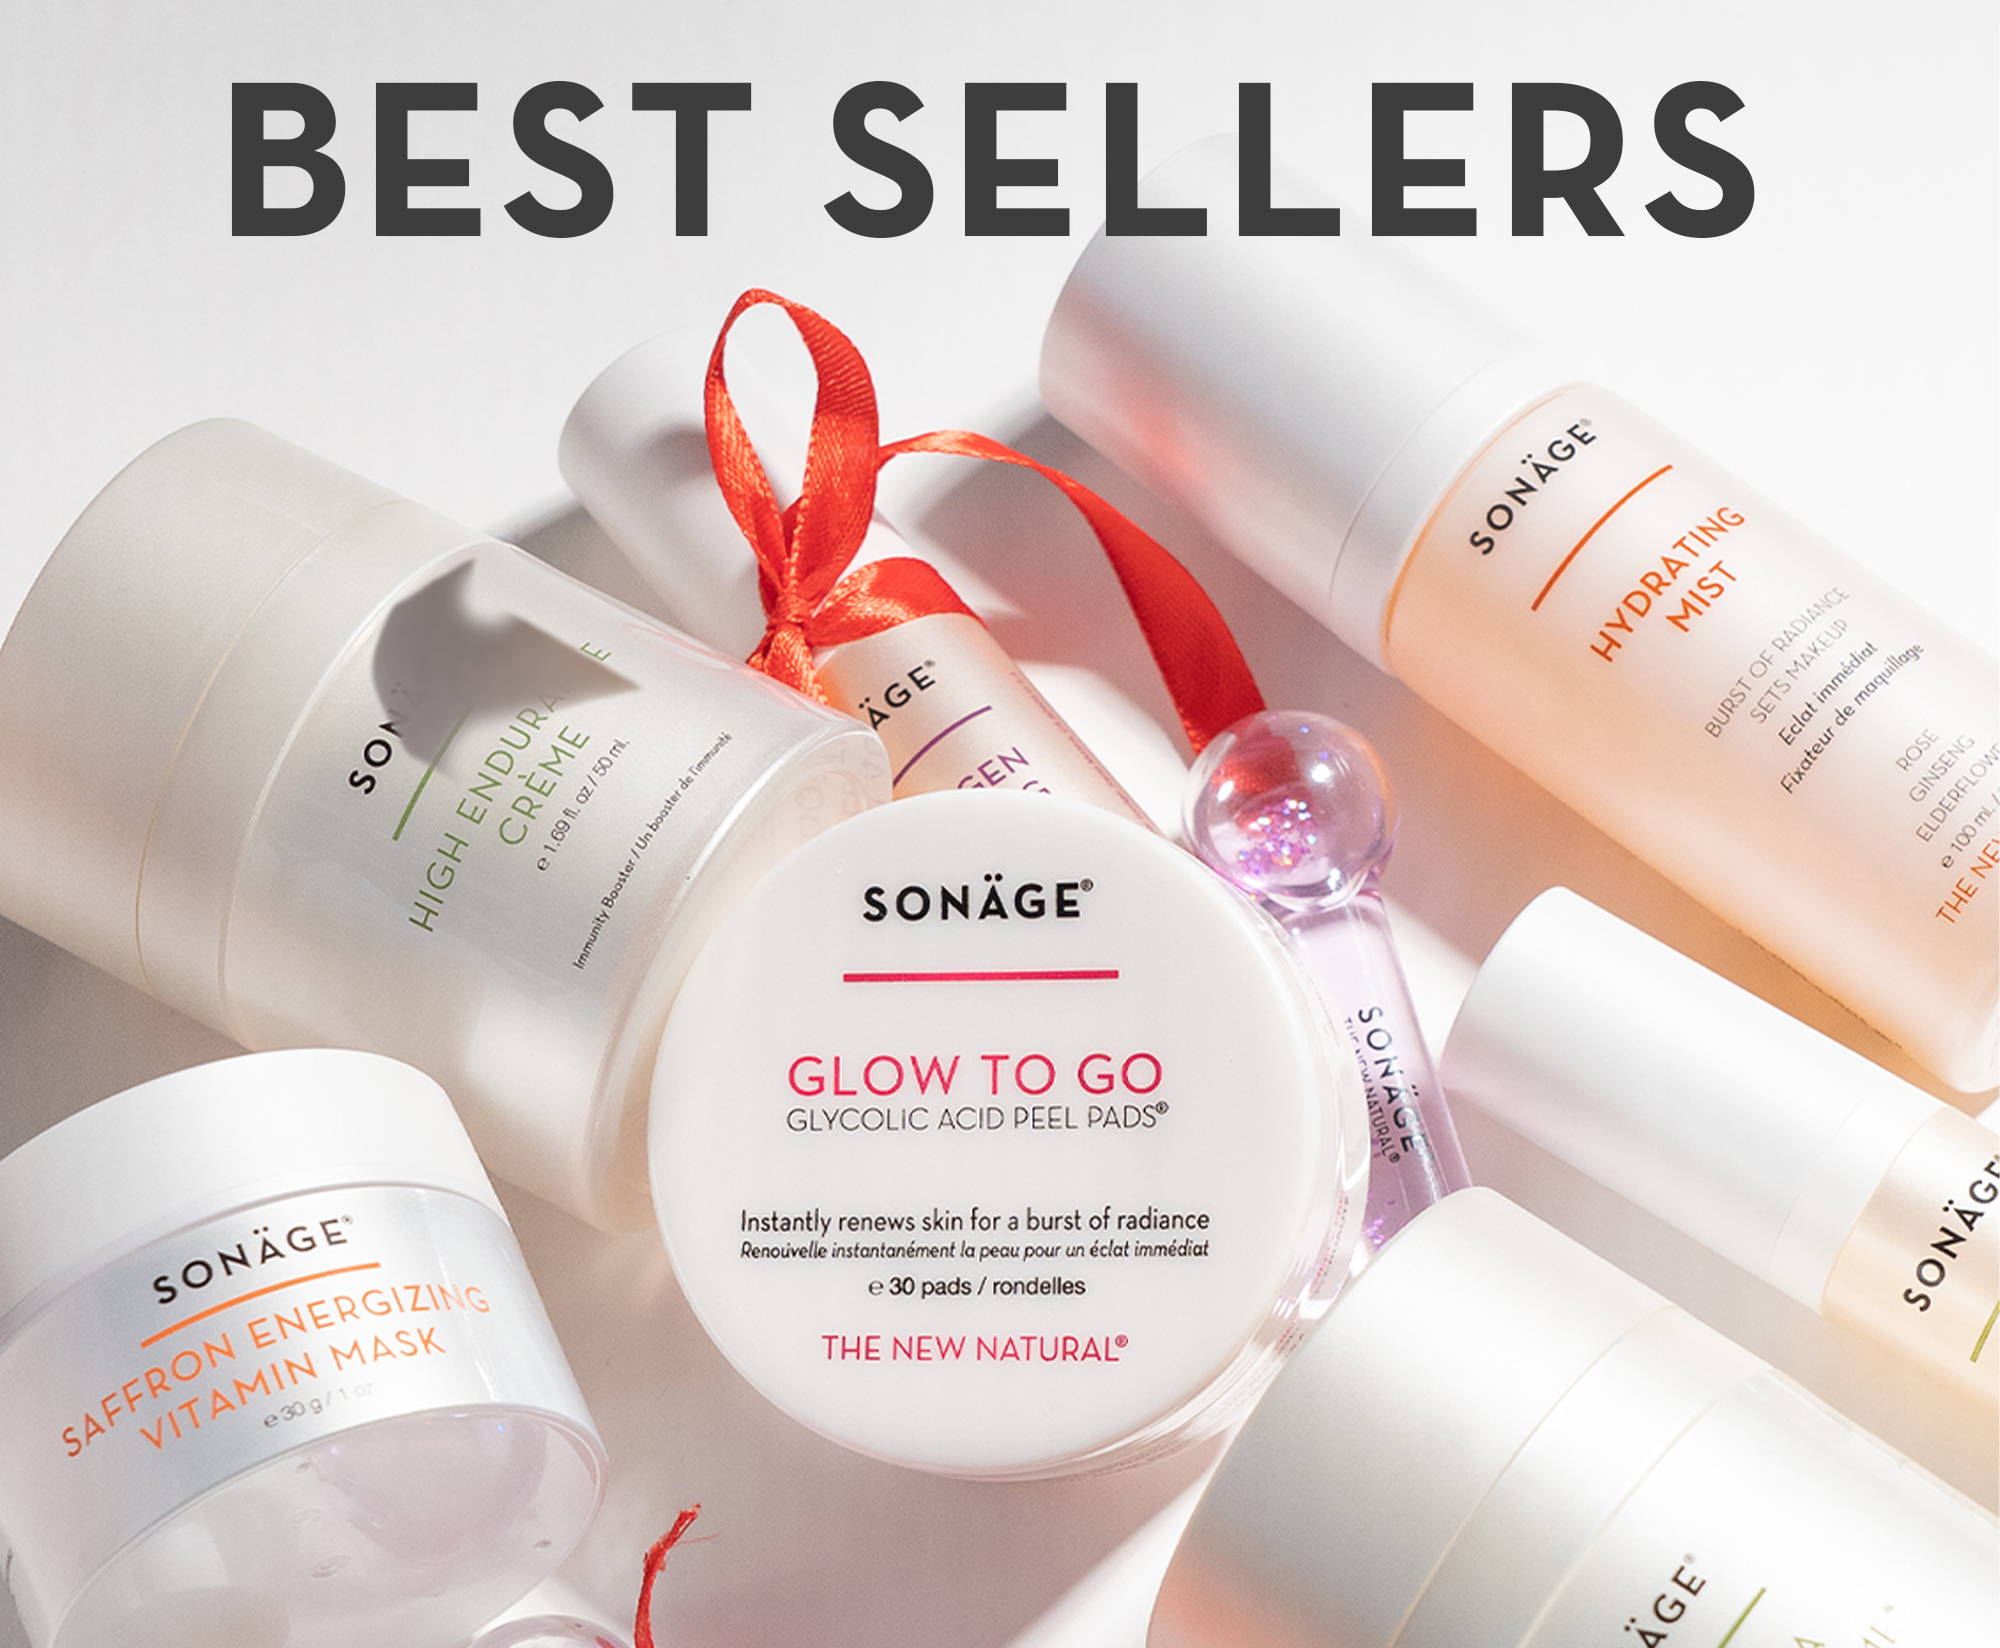 Best Sellers, Best-Selling Skin Care Products